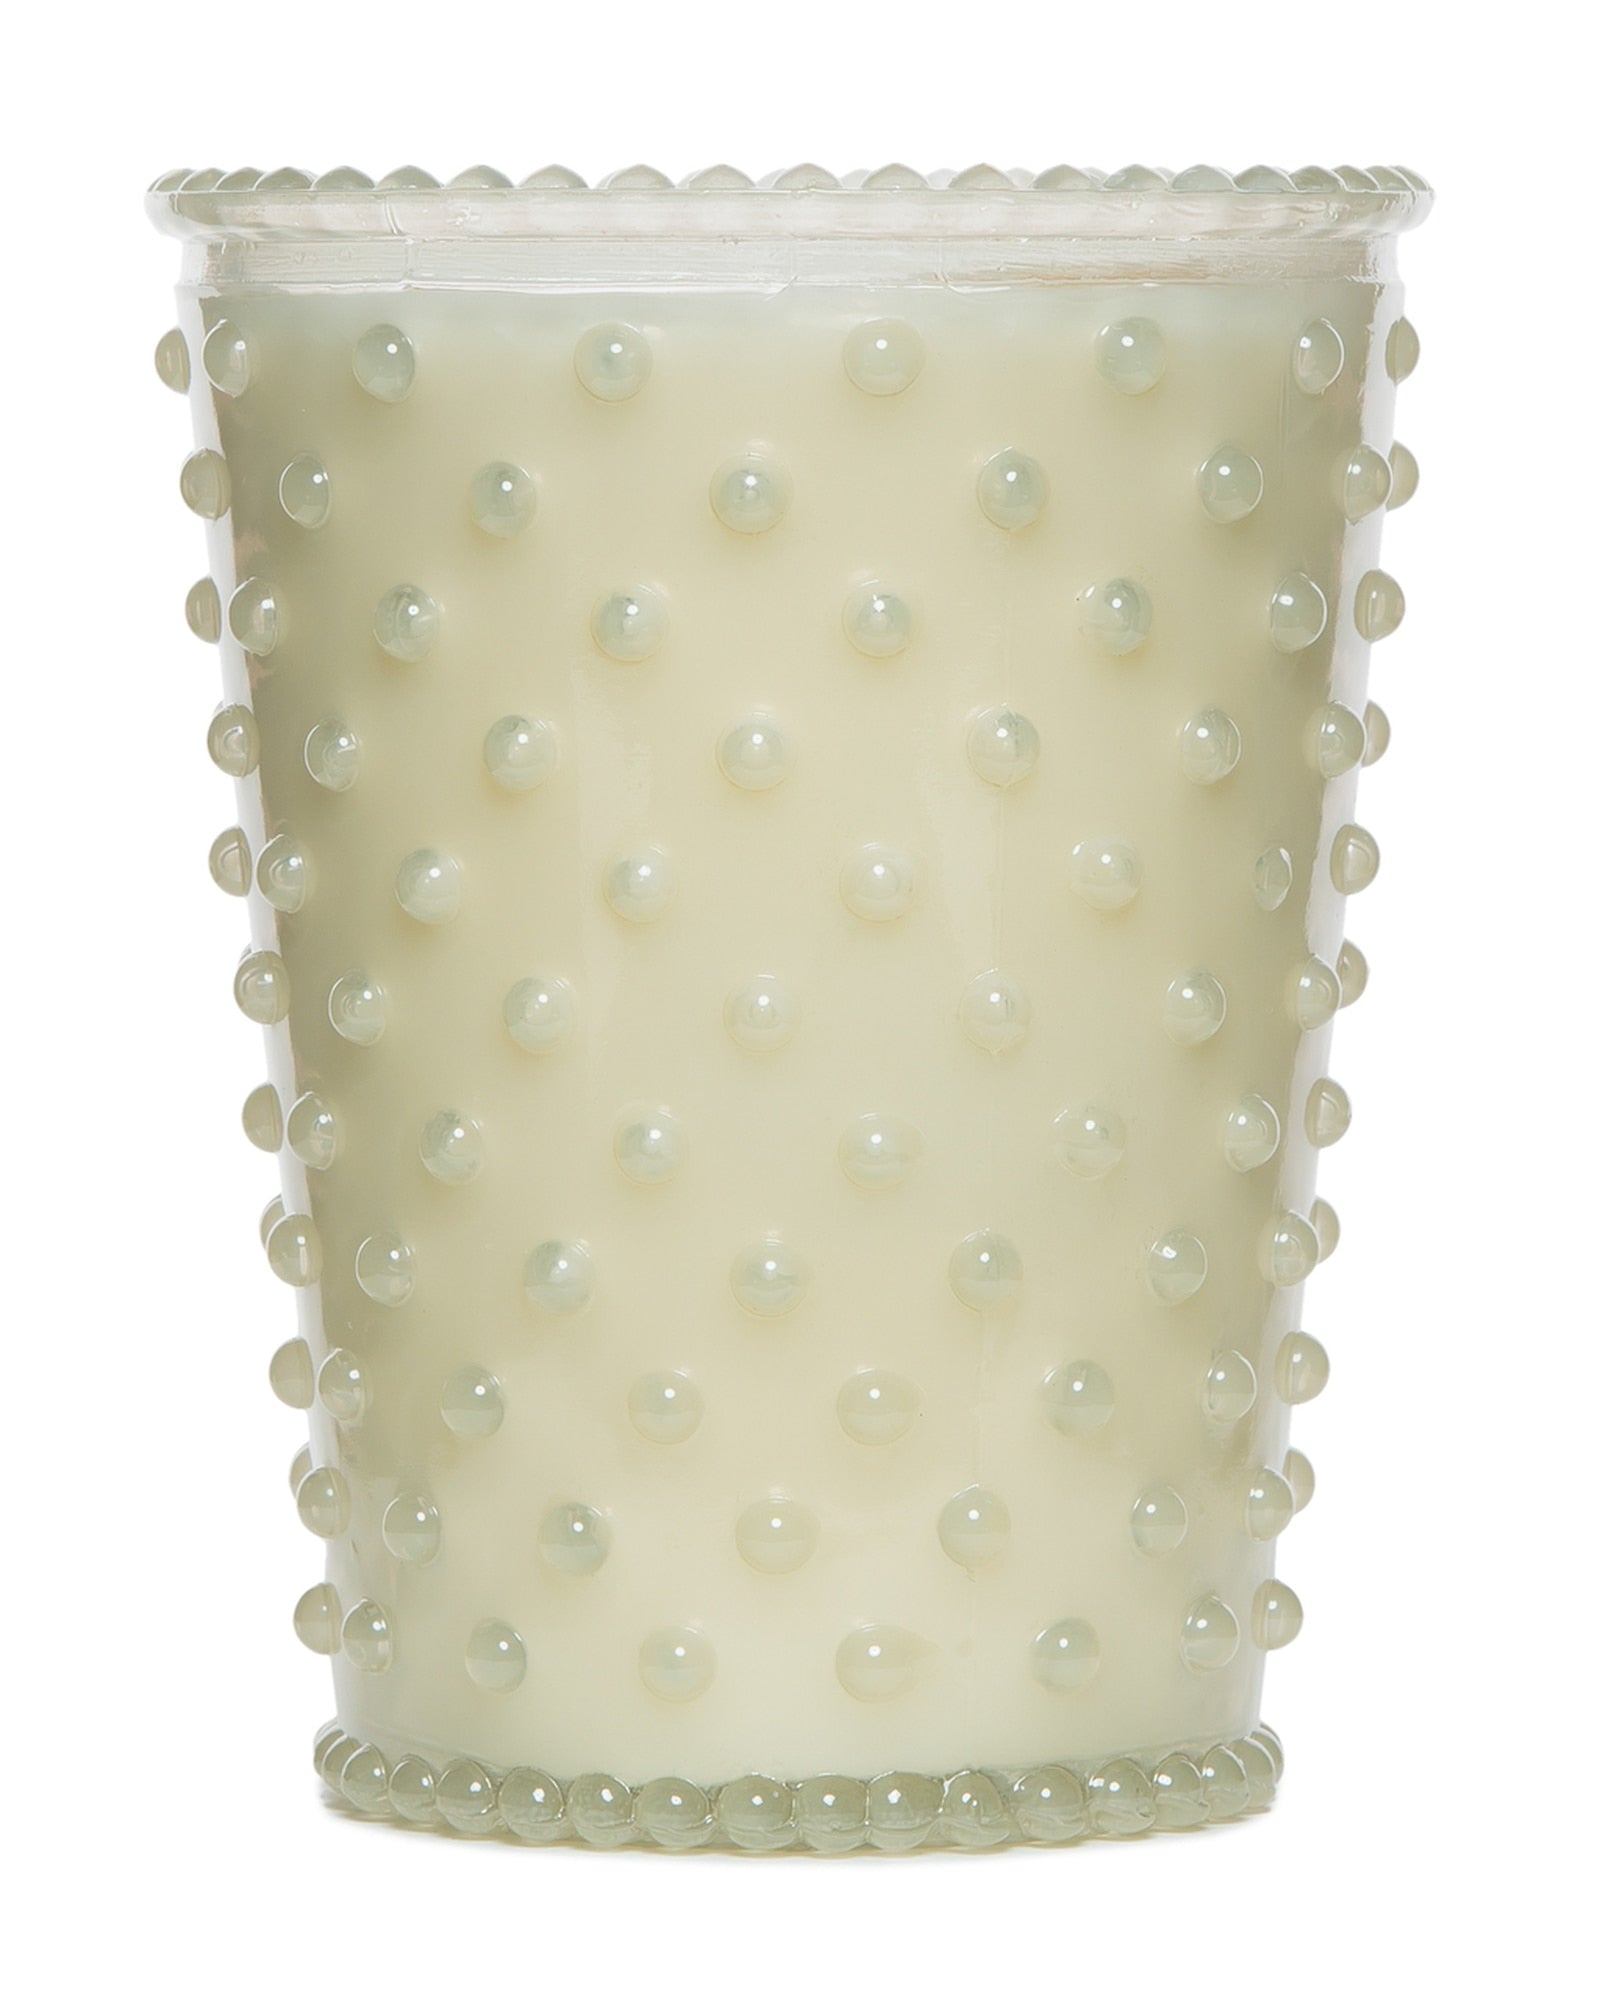 No. 42 White Flower Hobnail Glass Candle